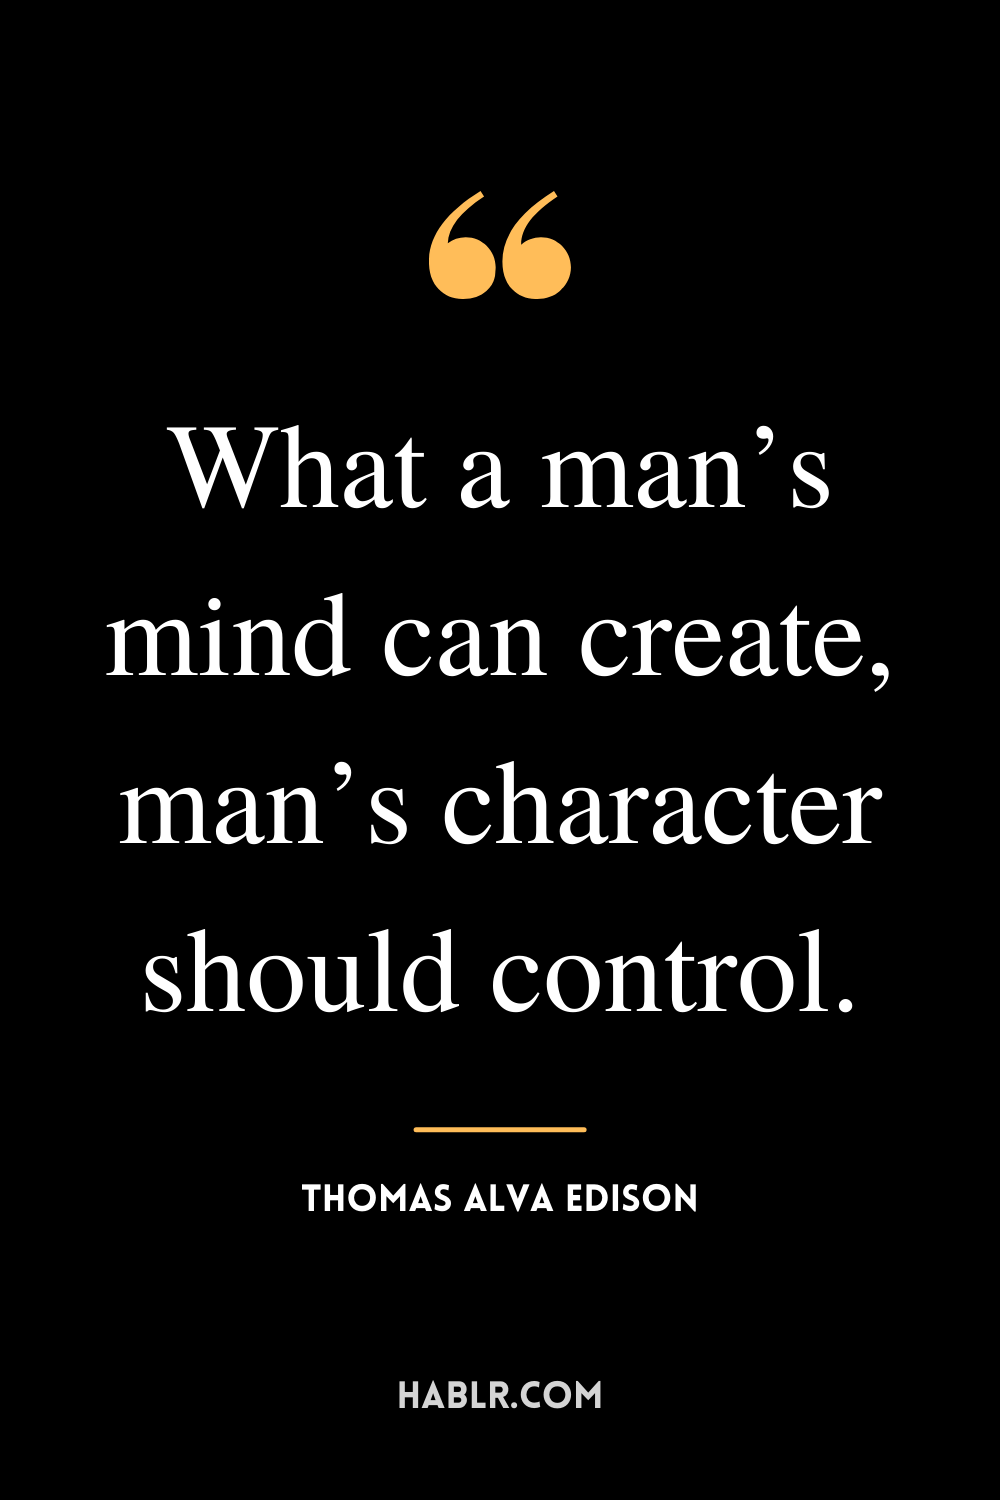 “What a man’s mind can create, man’s character should control.” -Thomas Alva Edison